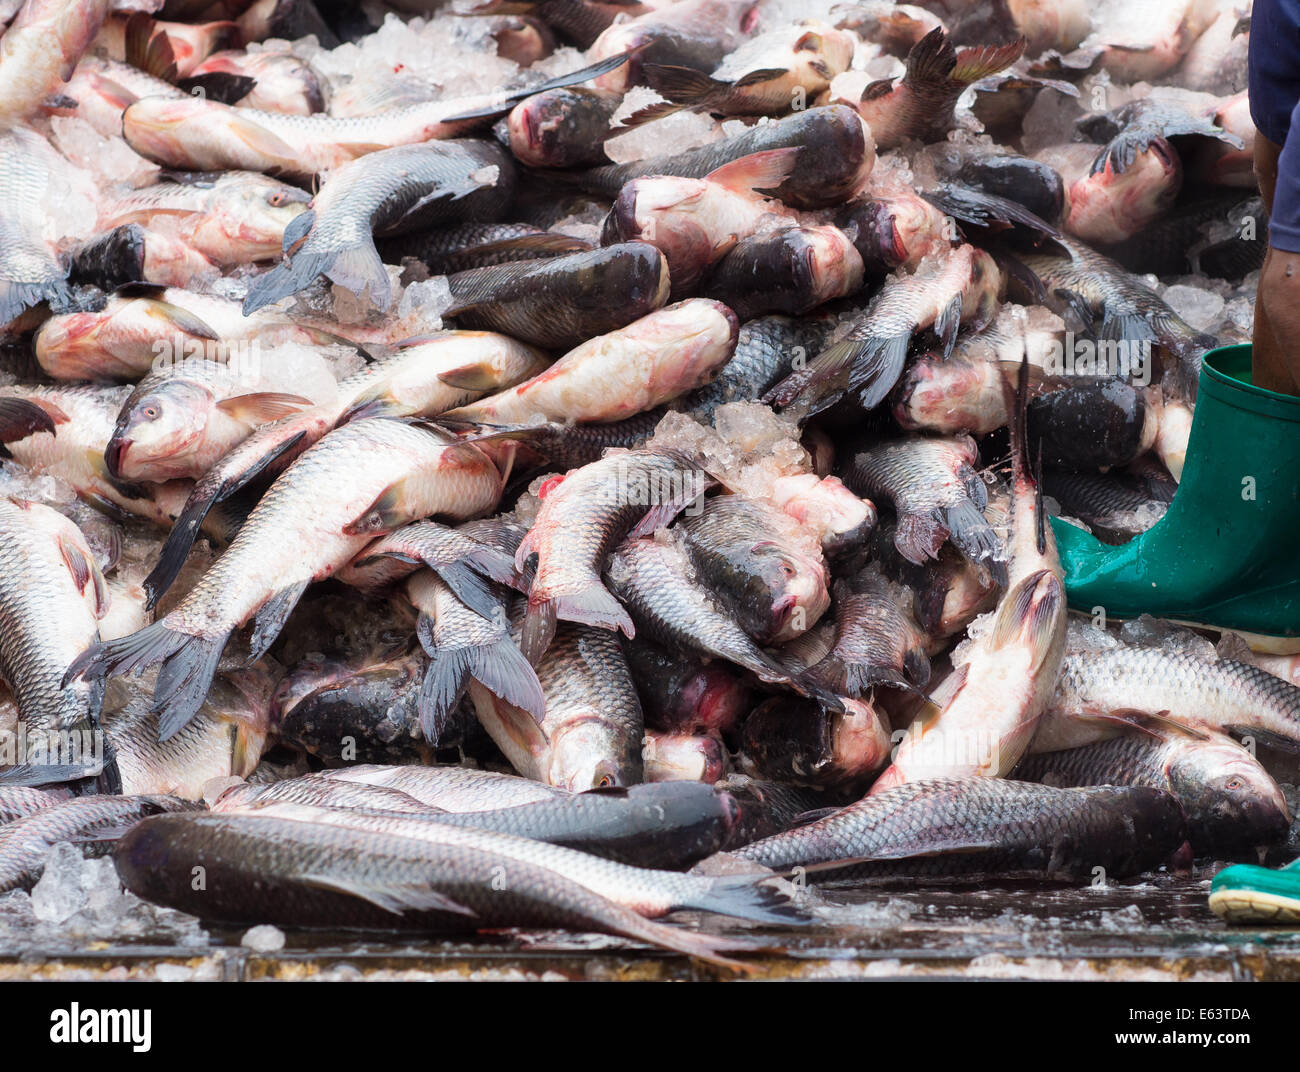 Carp fish being unloaded from a truck at a seafood market in Yangon, Myanmar. Stock Photo